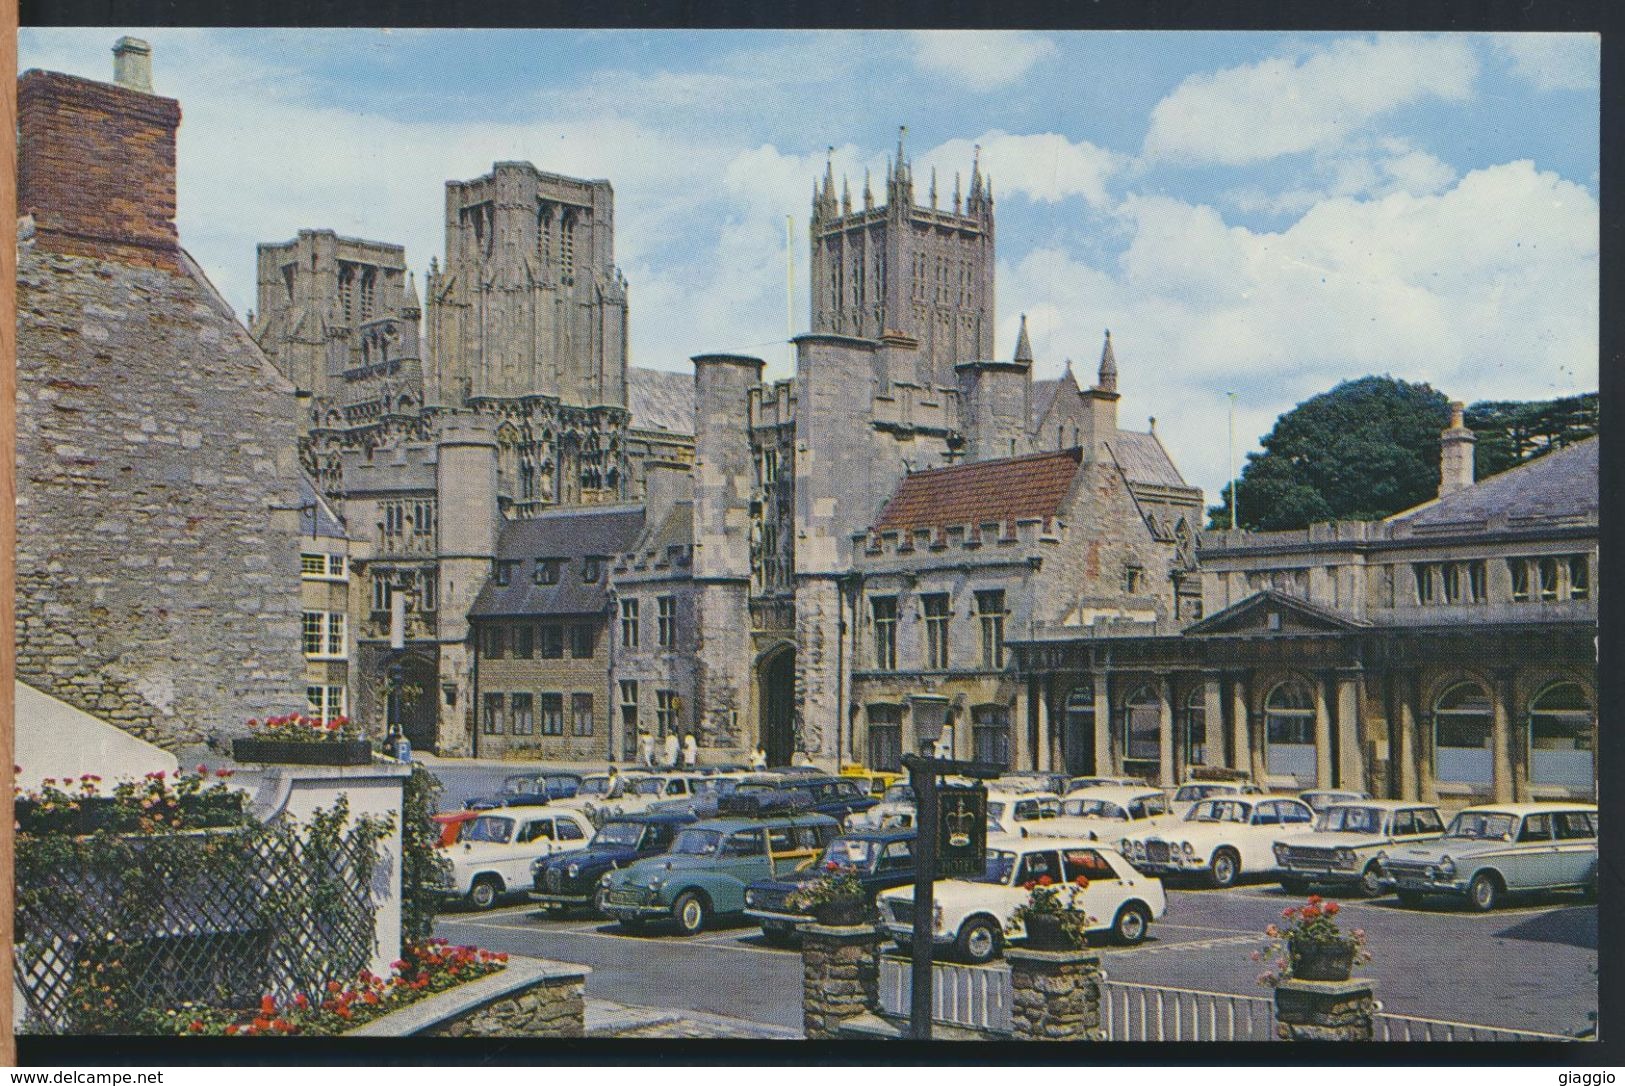 °°° 8296 - UK - WELLS - CATHEDRAL AND MARKET PLACE °°° - Wells